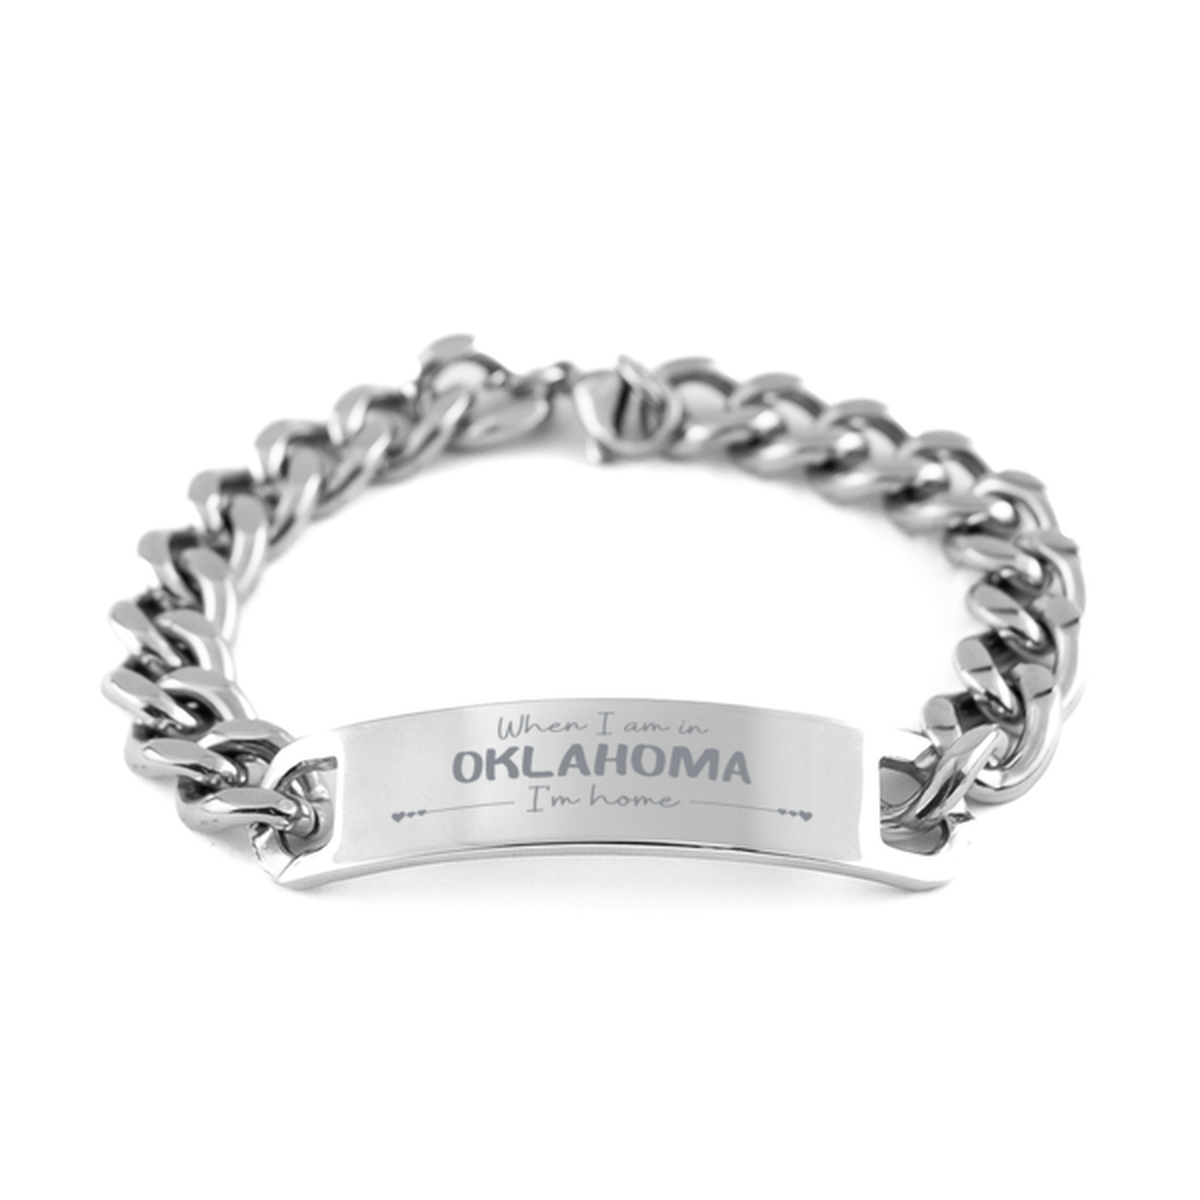 When I am in Oklahoma I'm home Cuban Chain Stainless Steel Bracelet, Cheap Gifts For Oklahoma, State Oklahoma Birthday Gifts for Friends Coworker